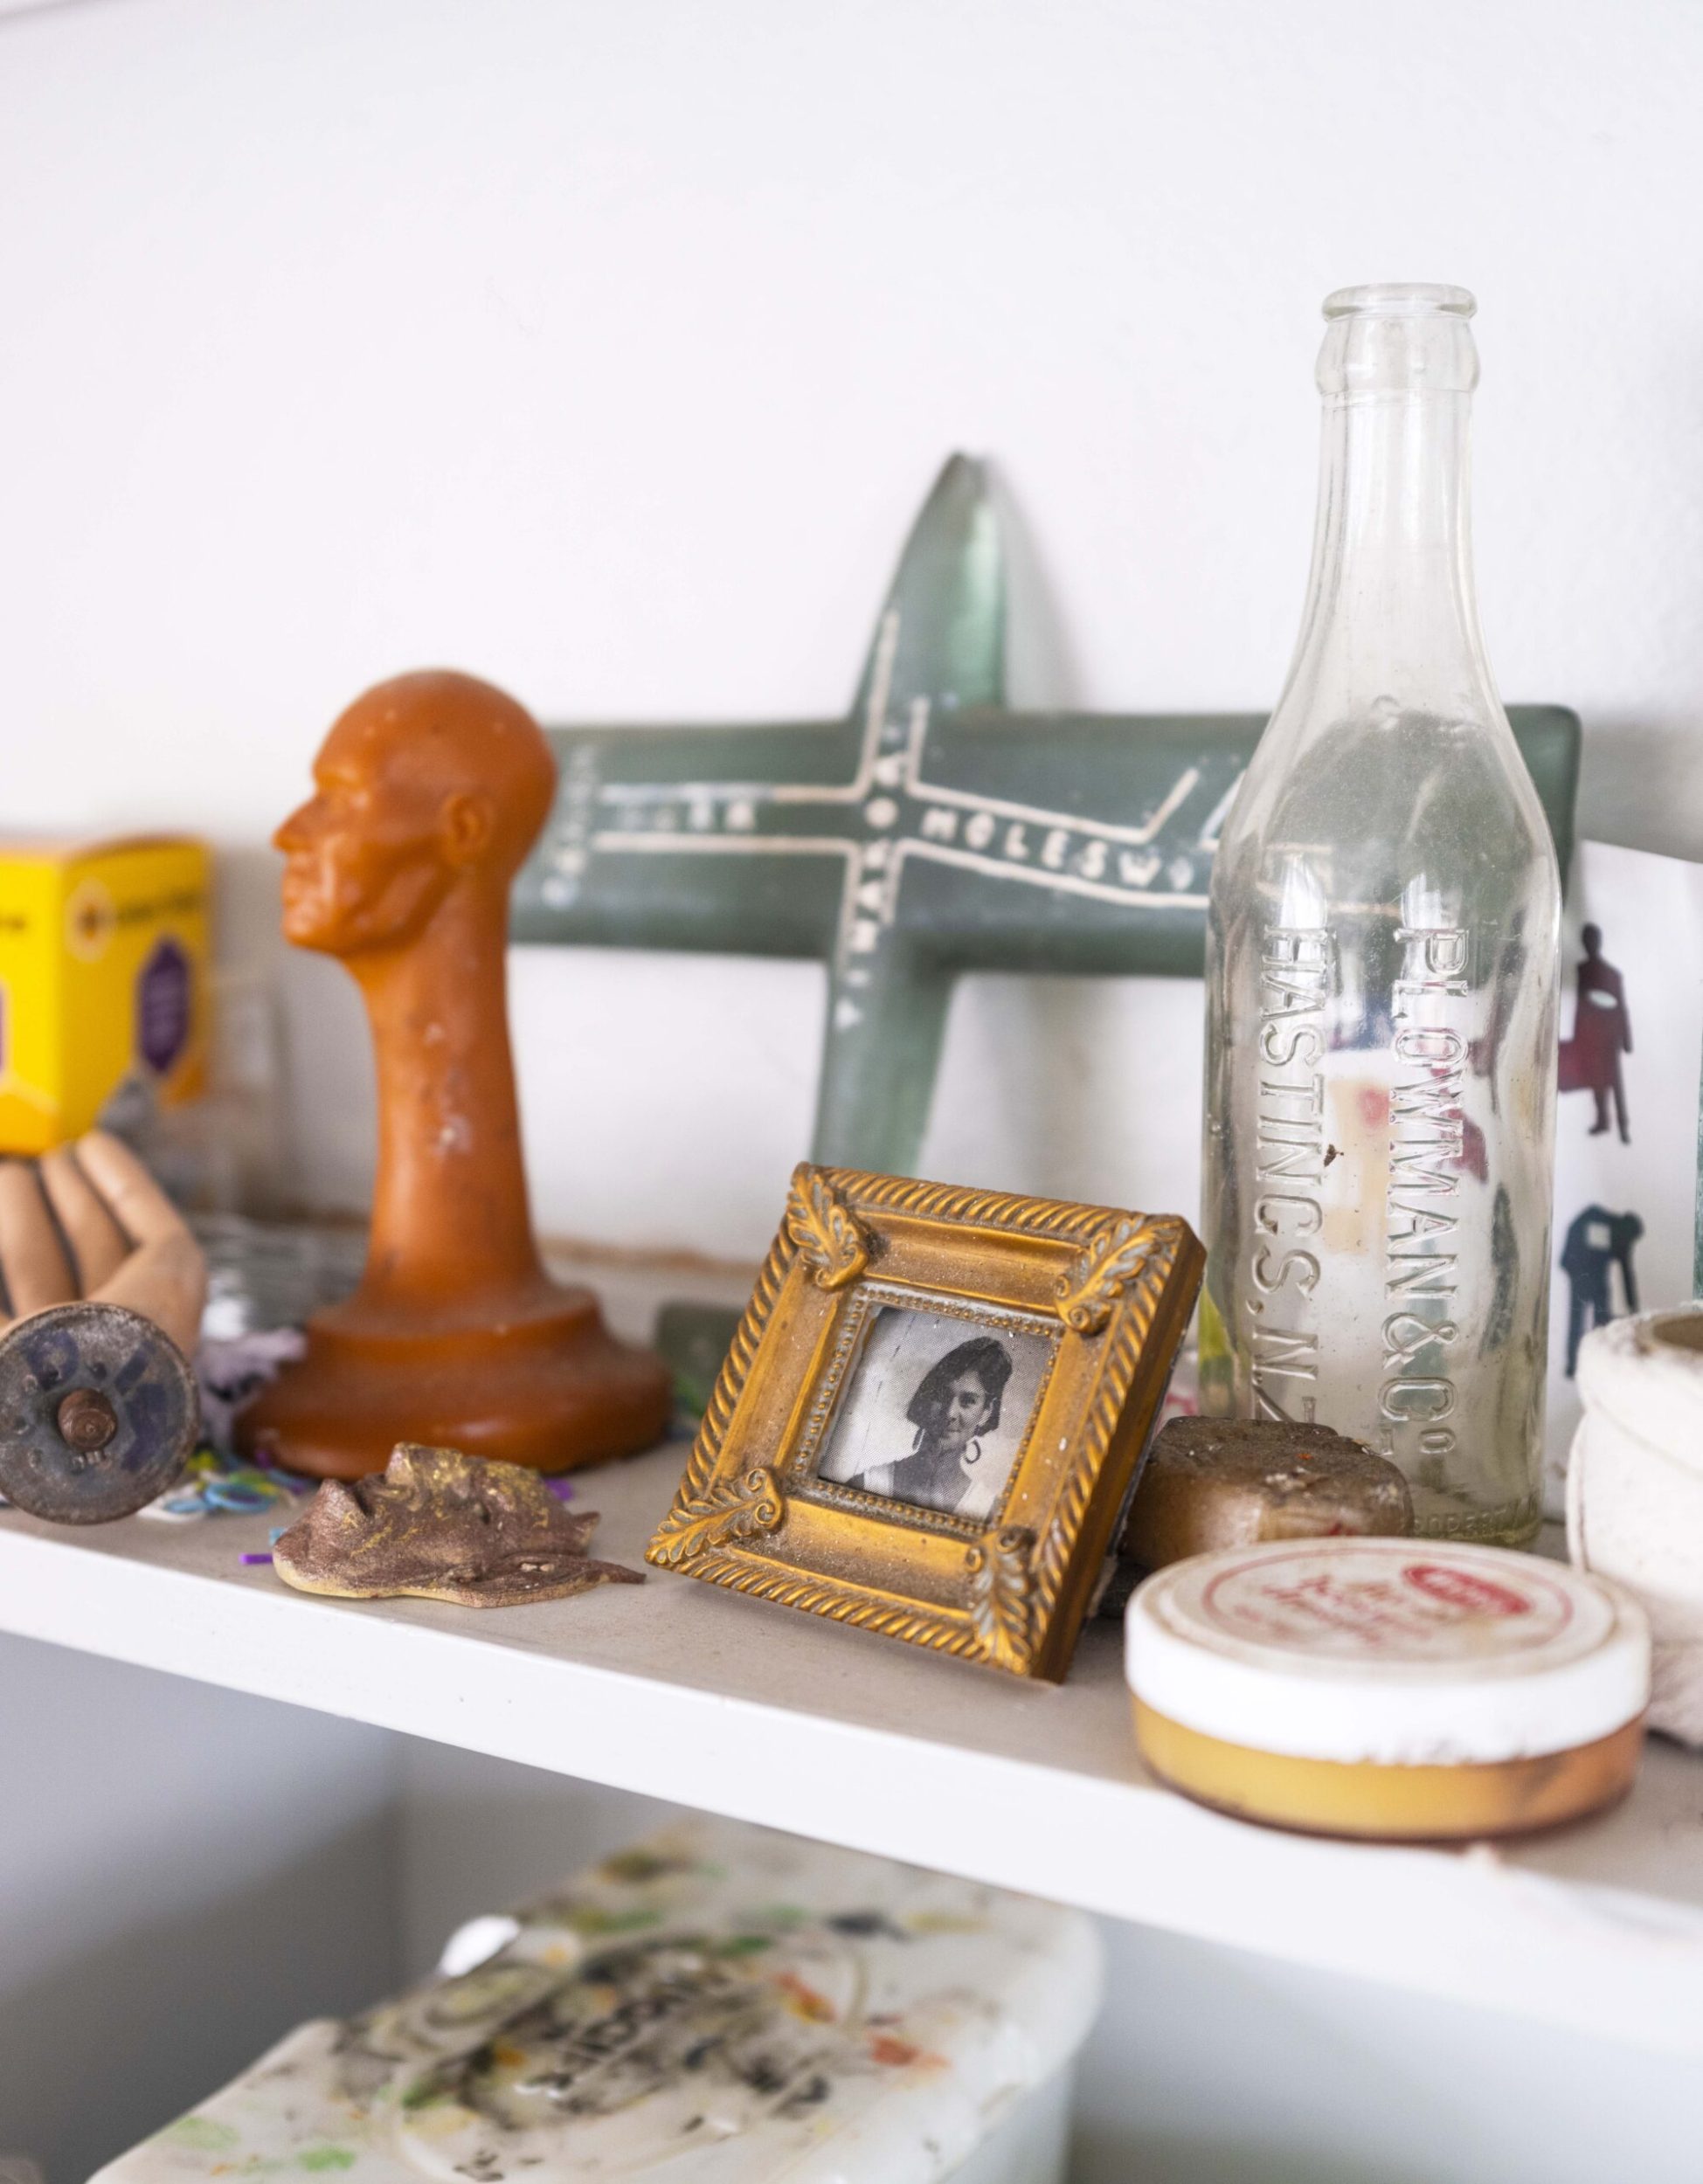 A shelf with various objects and photo frame